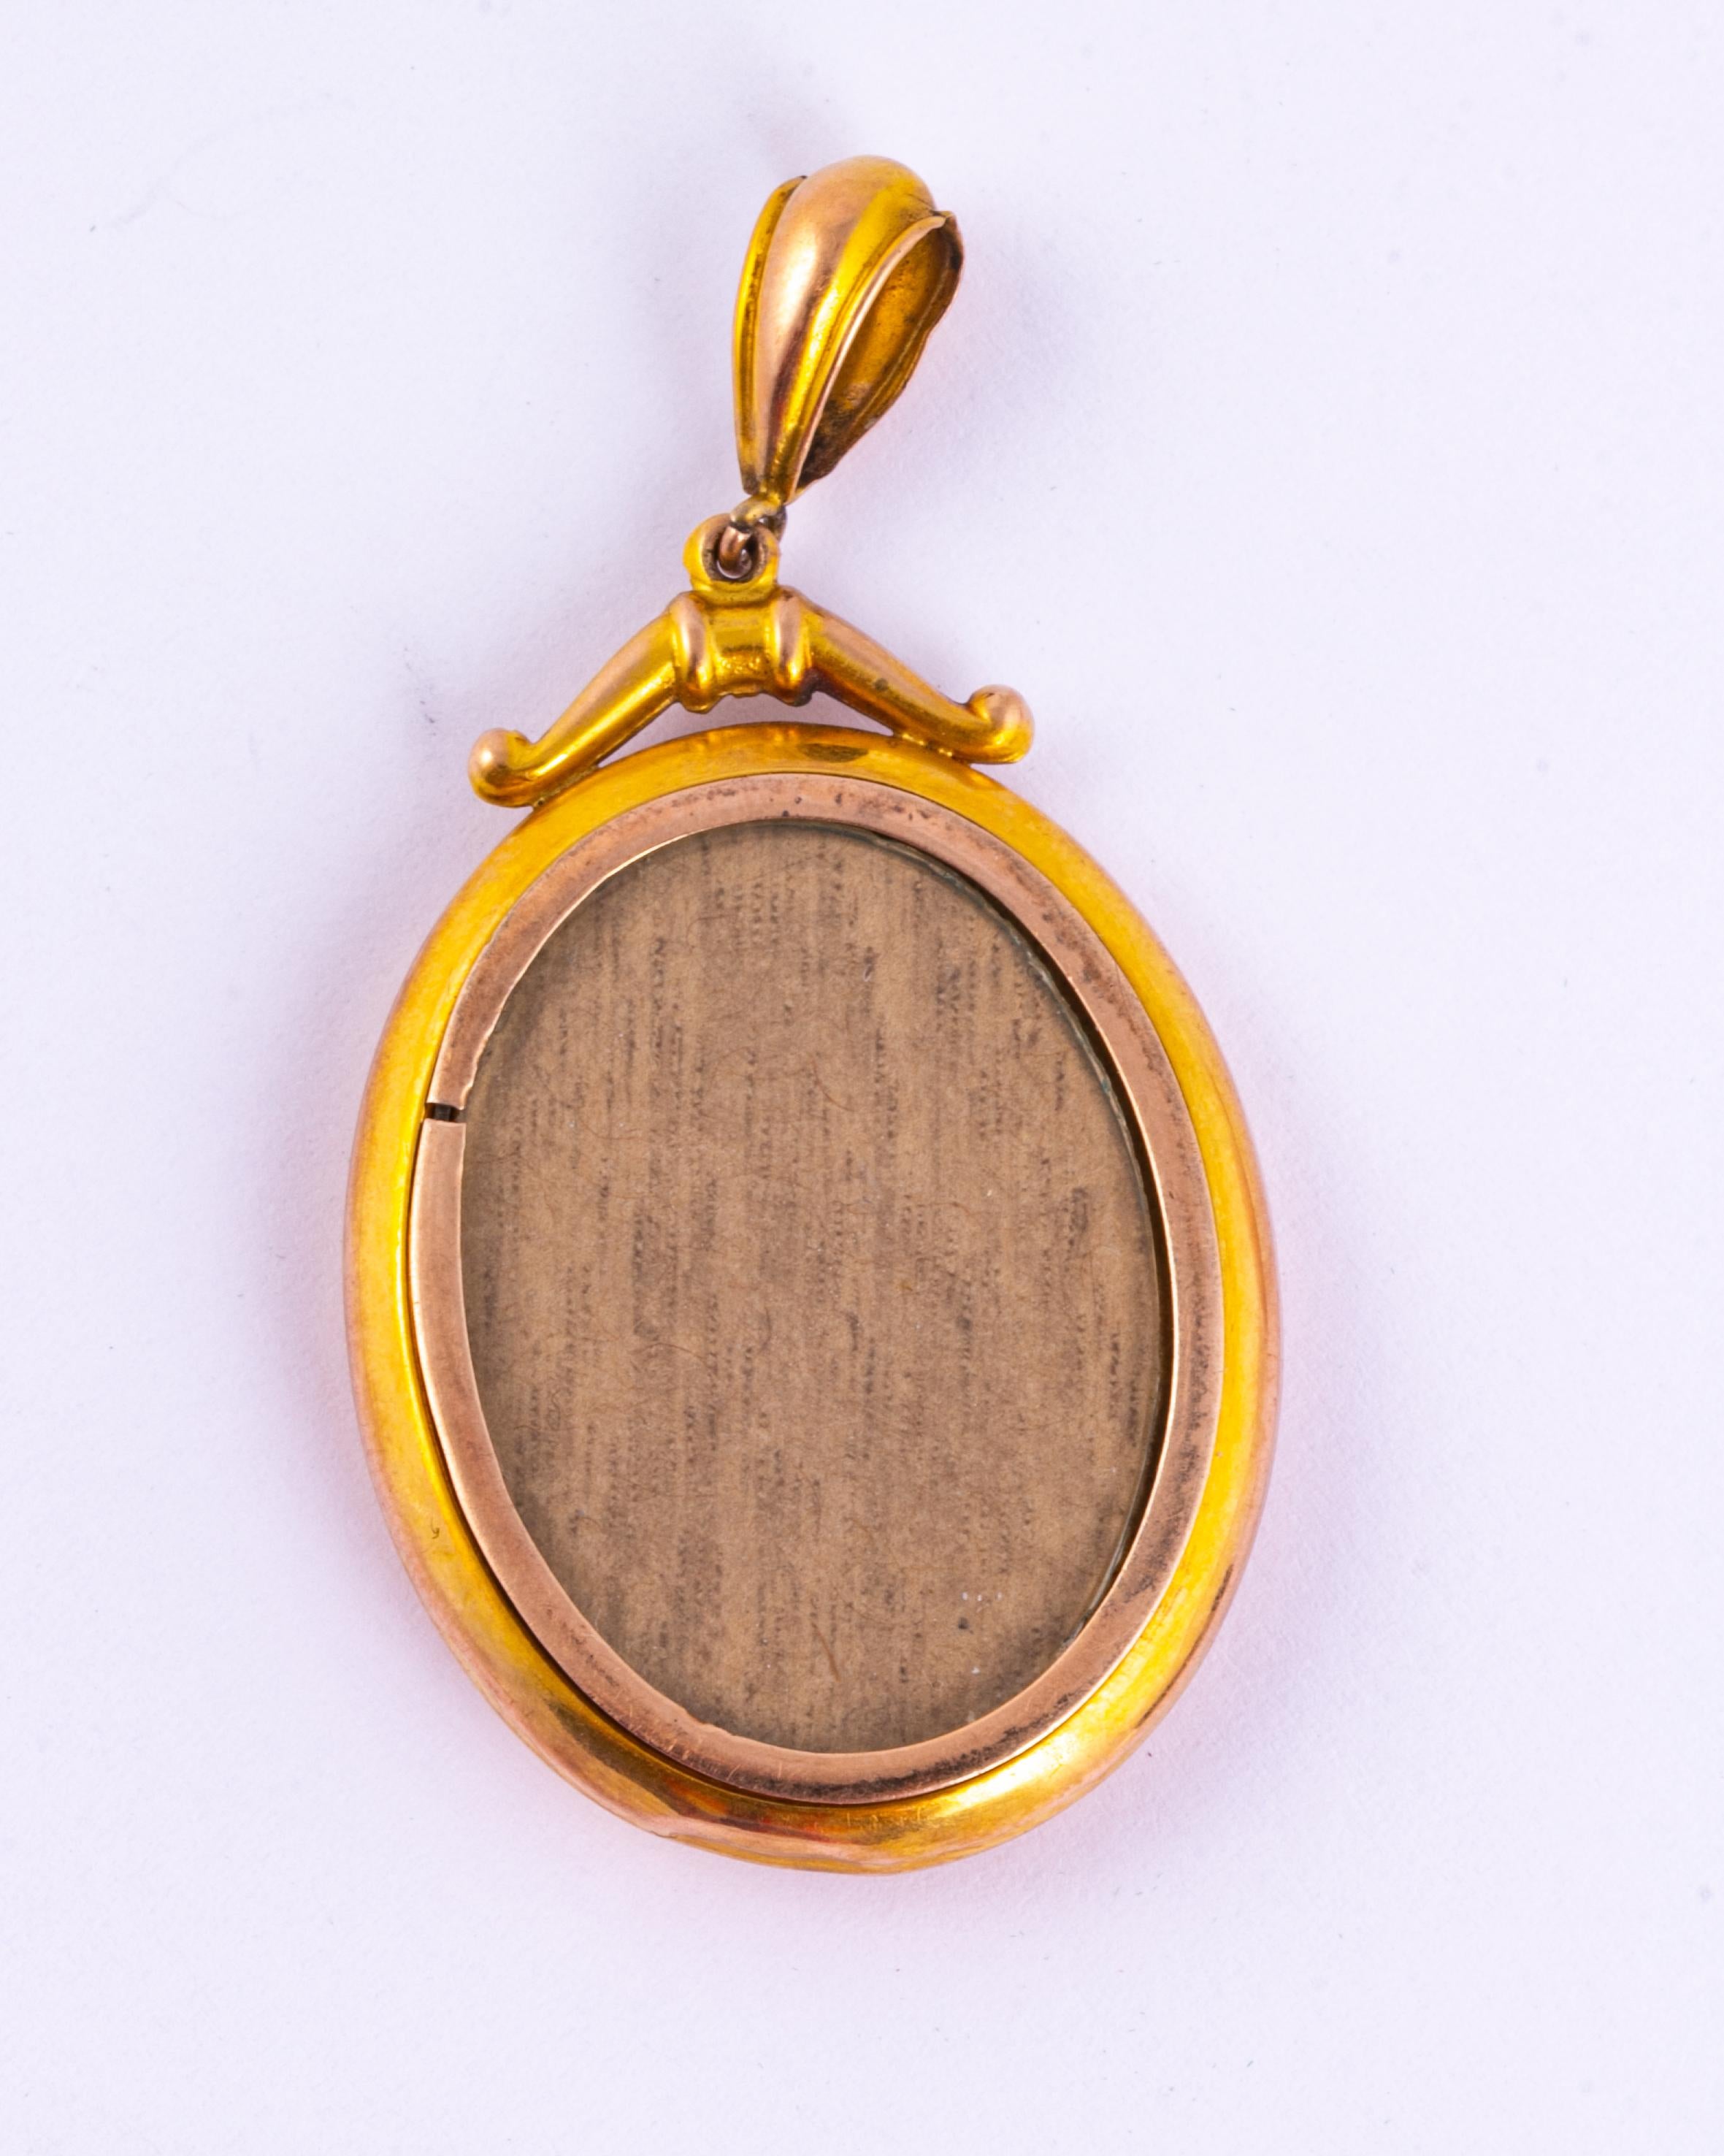 This locket is left empty for you to fill with your loved ones or a treasured memory. The locket is modelled in 9ct gold and has the original glass on the front and back. 

Dimensions: 26x33mm 

Weight: 6.7g